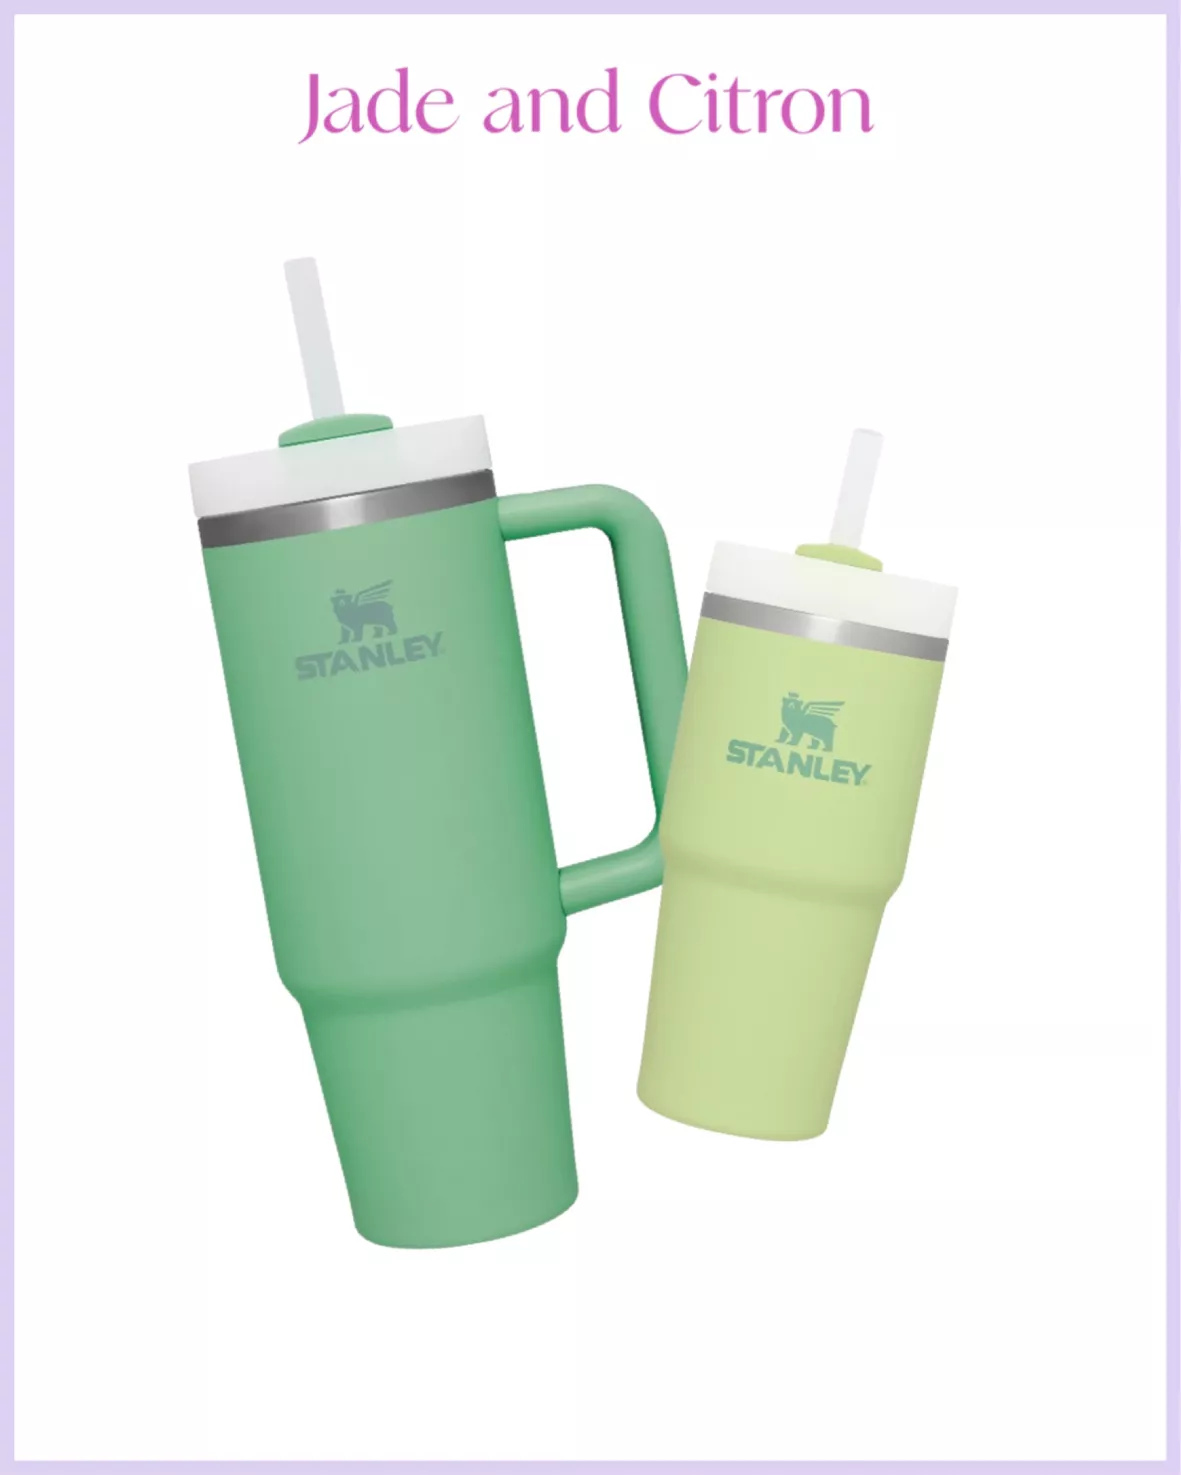 Stanley The Quencher 30 oz. H2.0 FlowState Tumbler in Jade